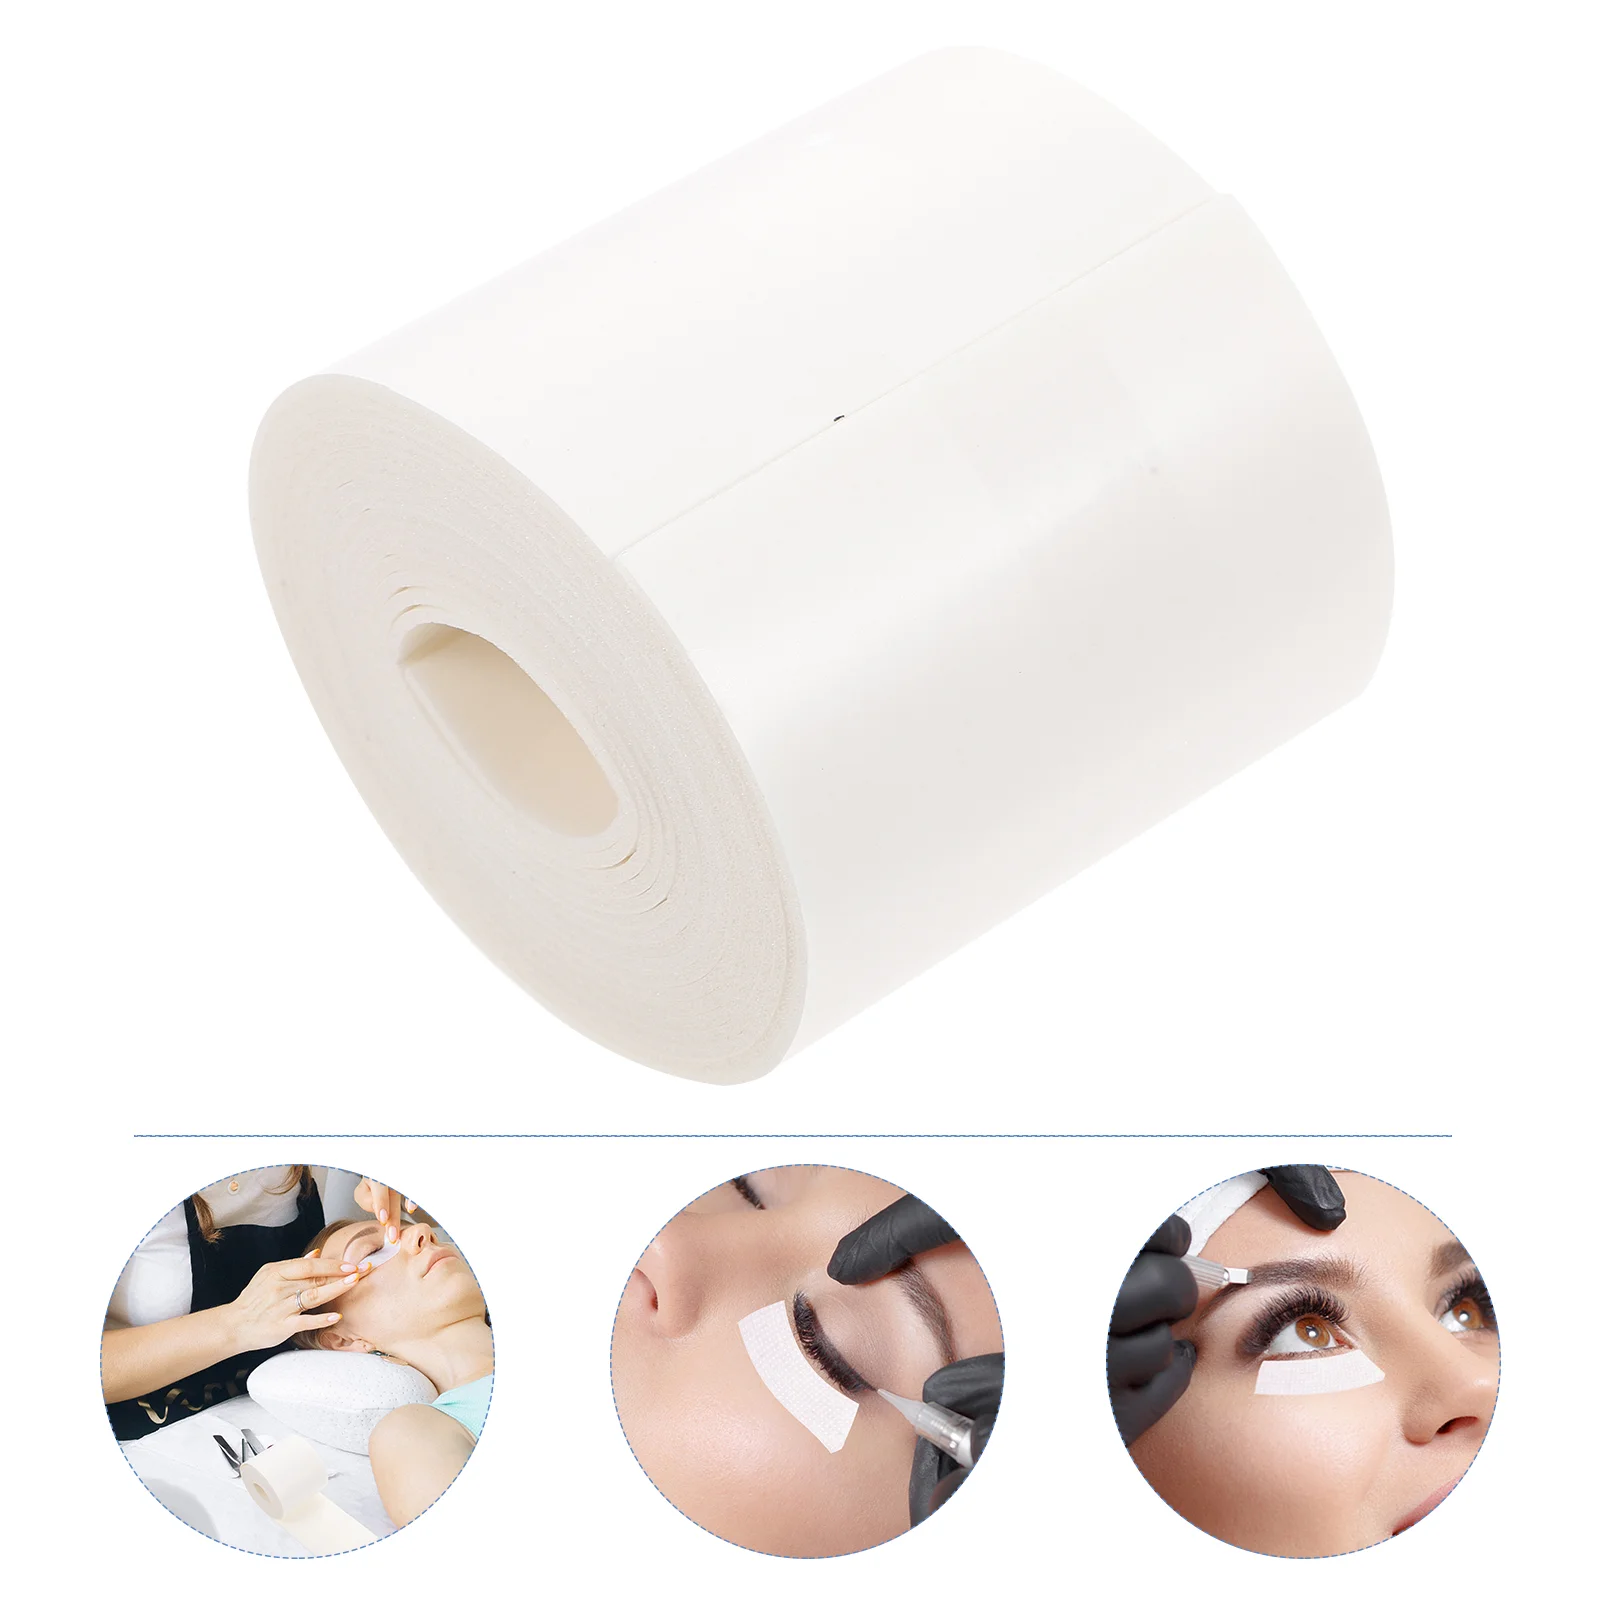 

Eyelash Eye Extension Pads Tape Pad Foam Grafting Lash Tool Makeup Microfoam Supplies Beauty Tapes Extensions Eyelashes Patches